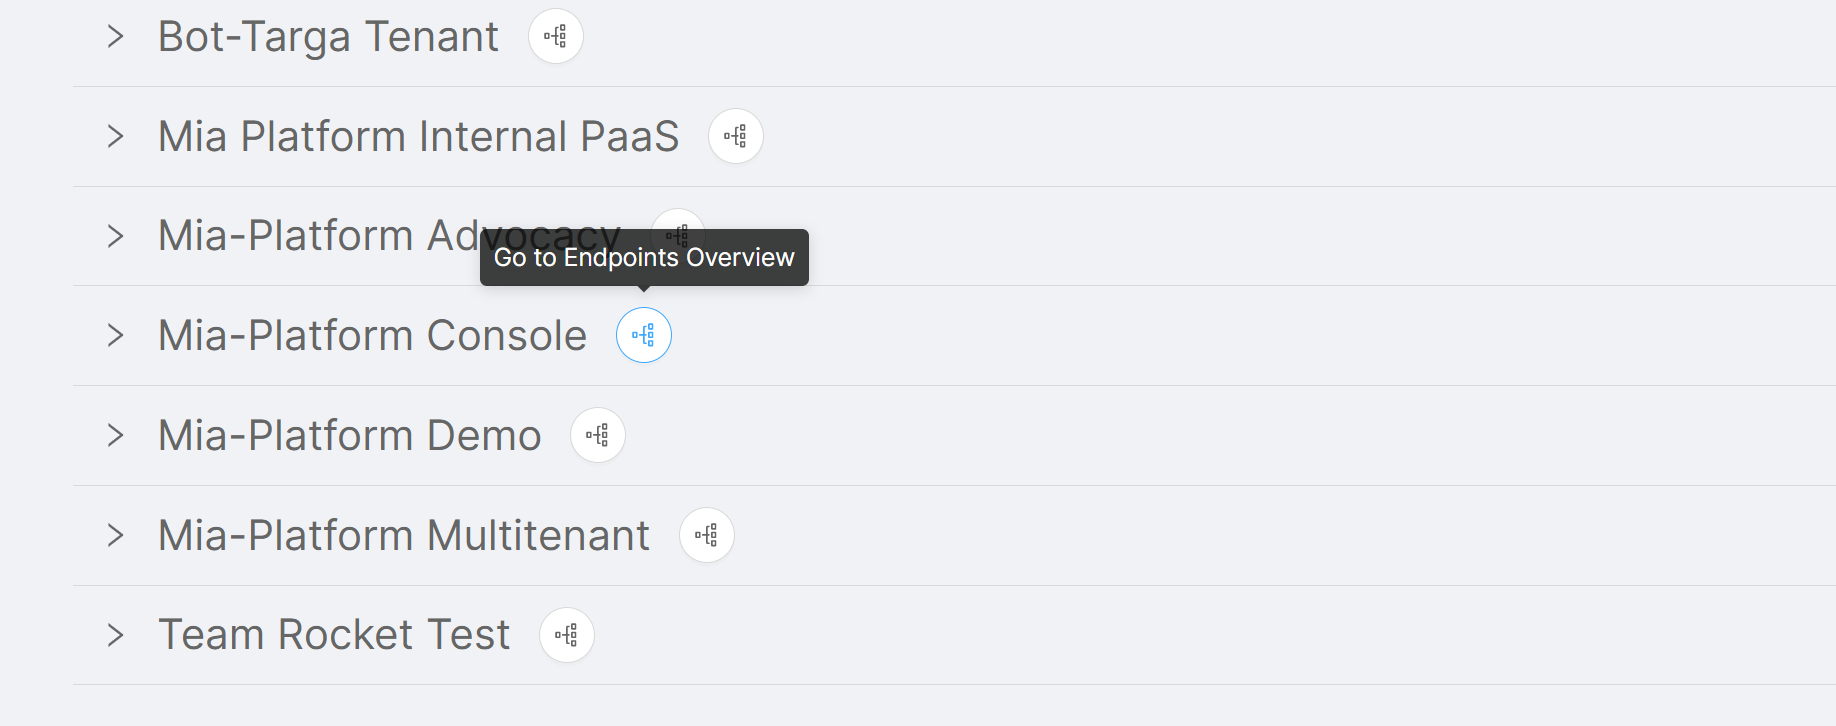 Endpoints Overview BUtton